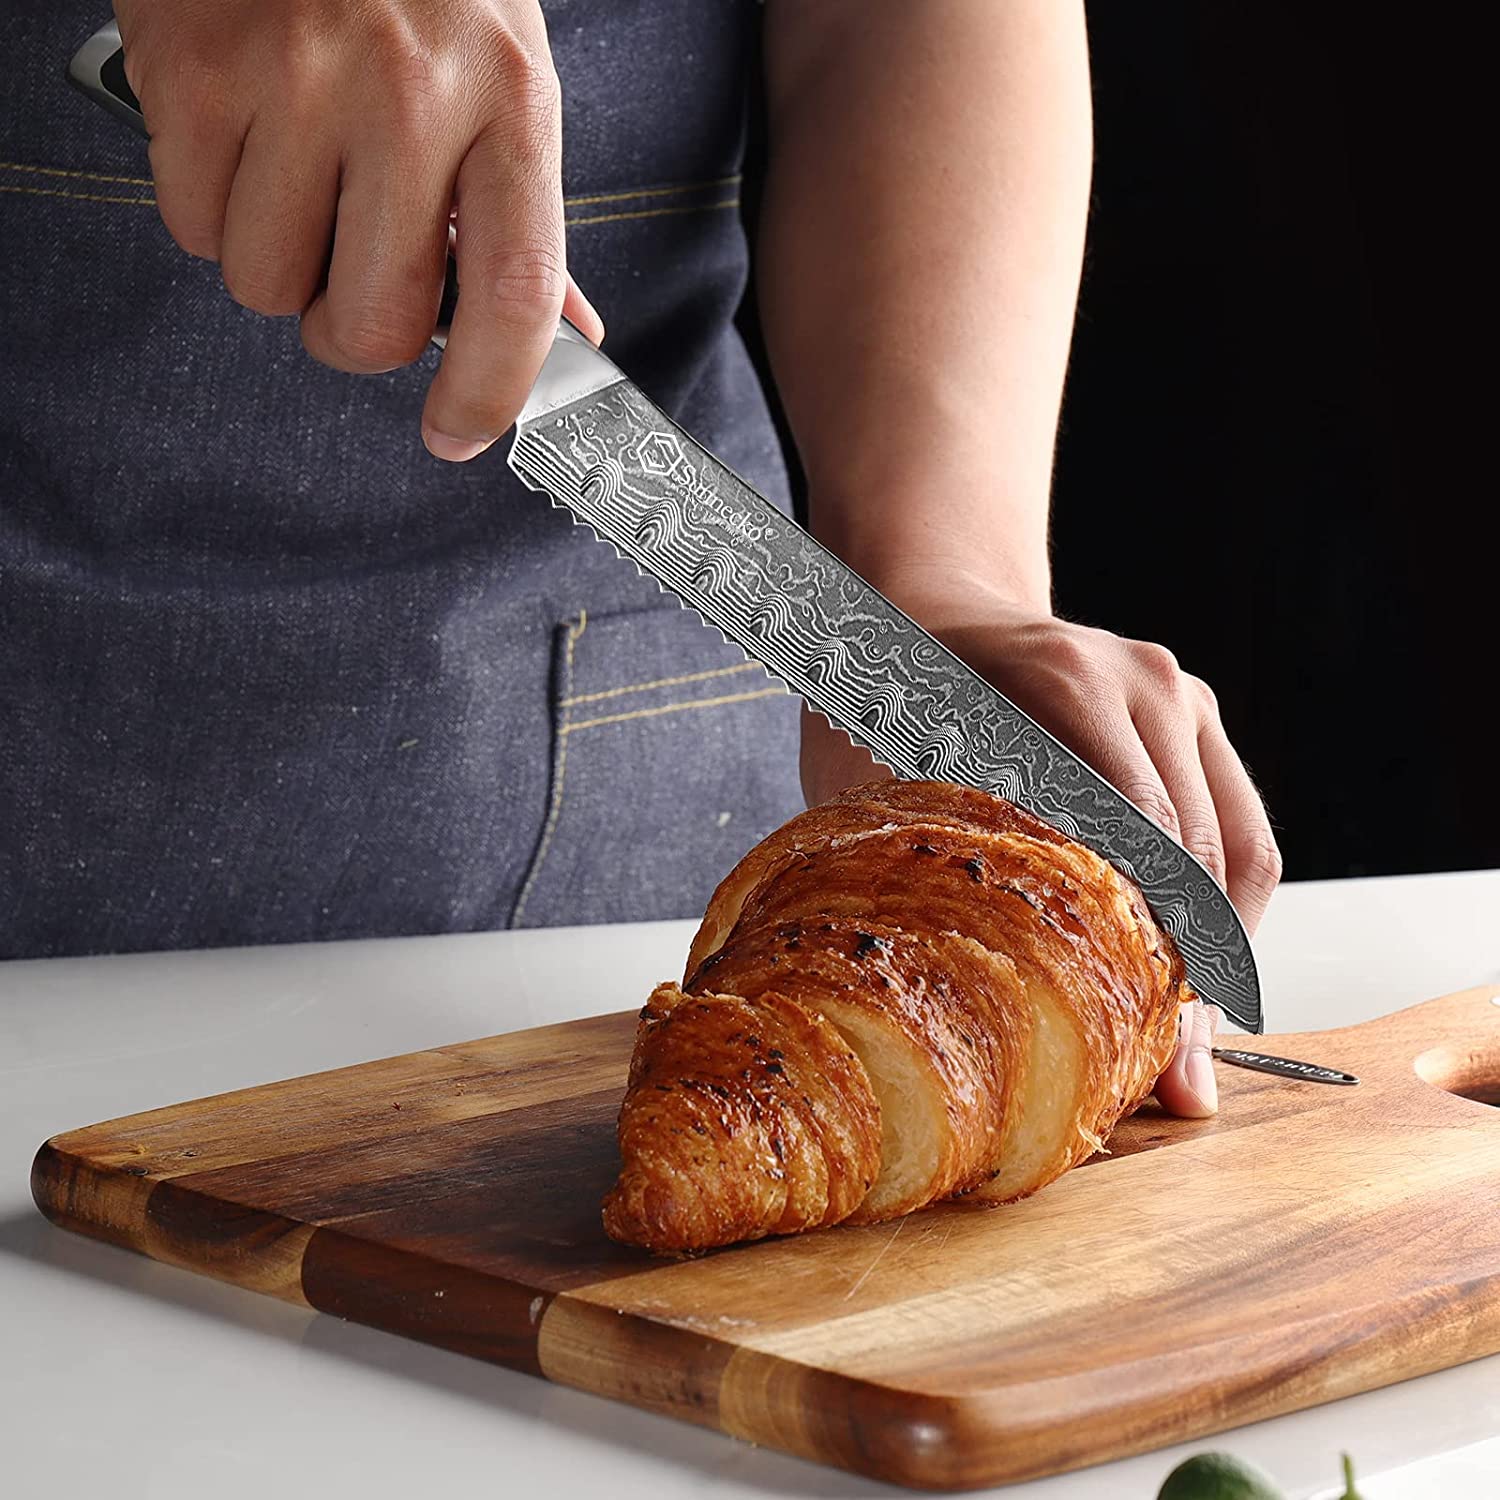 8 inch Bread Knife Serrated Knife Ultra Sharp Slicing Knife with